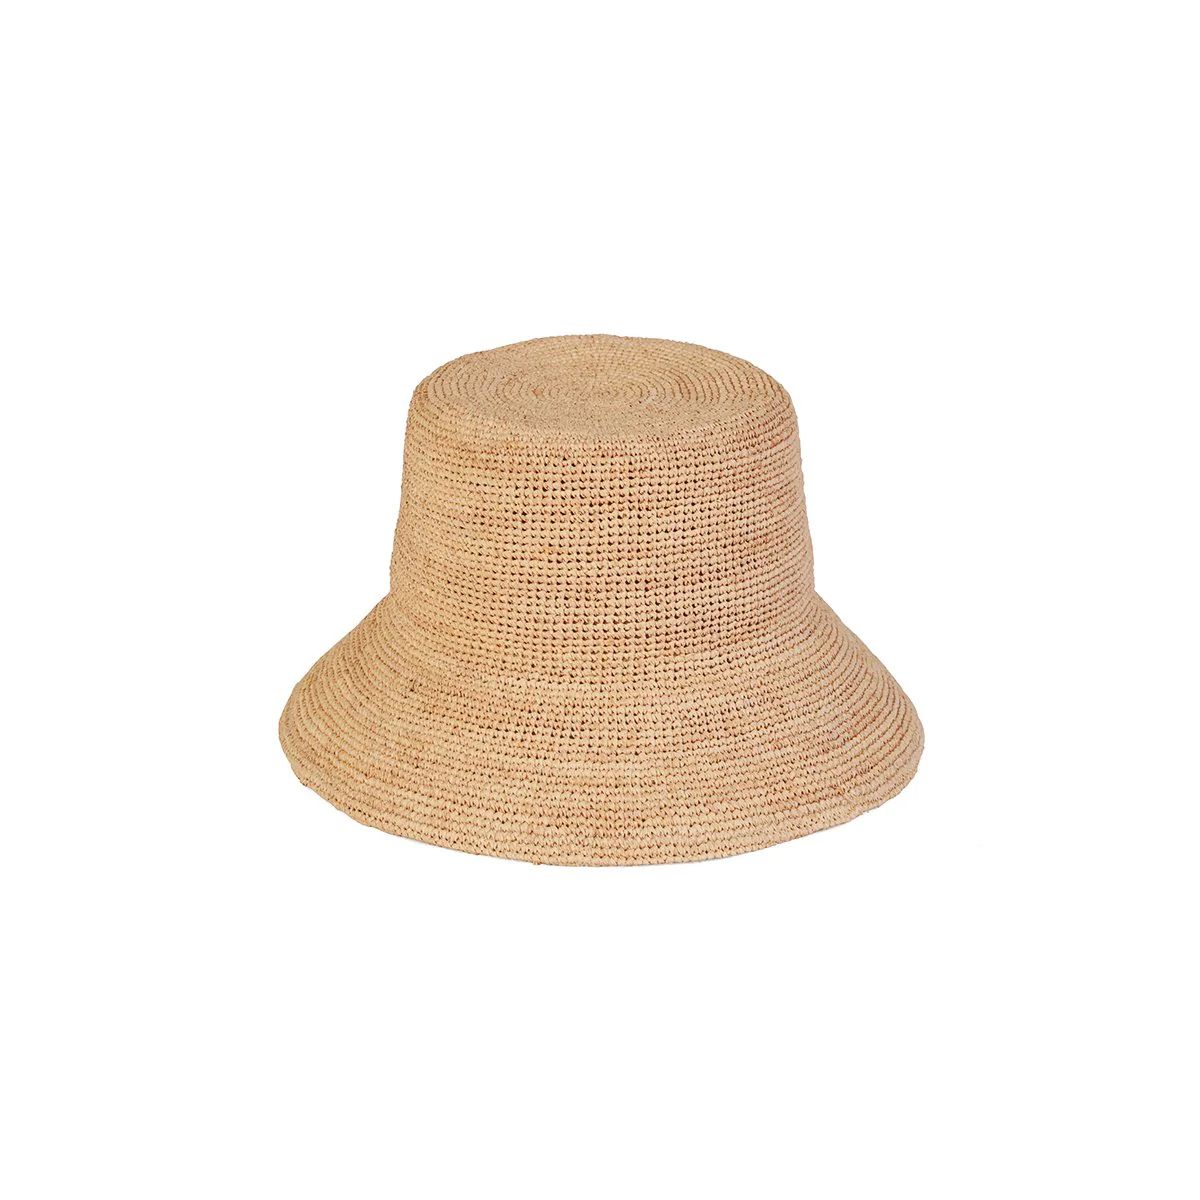 The Inca Bucket - Straw Bucket Hat in Natural | Lack of Color US | Lack of Color US